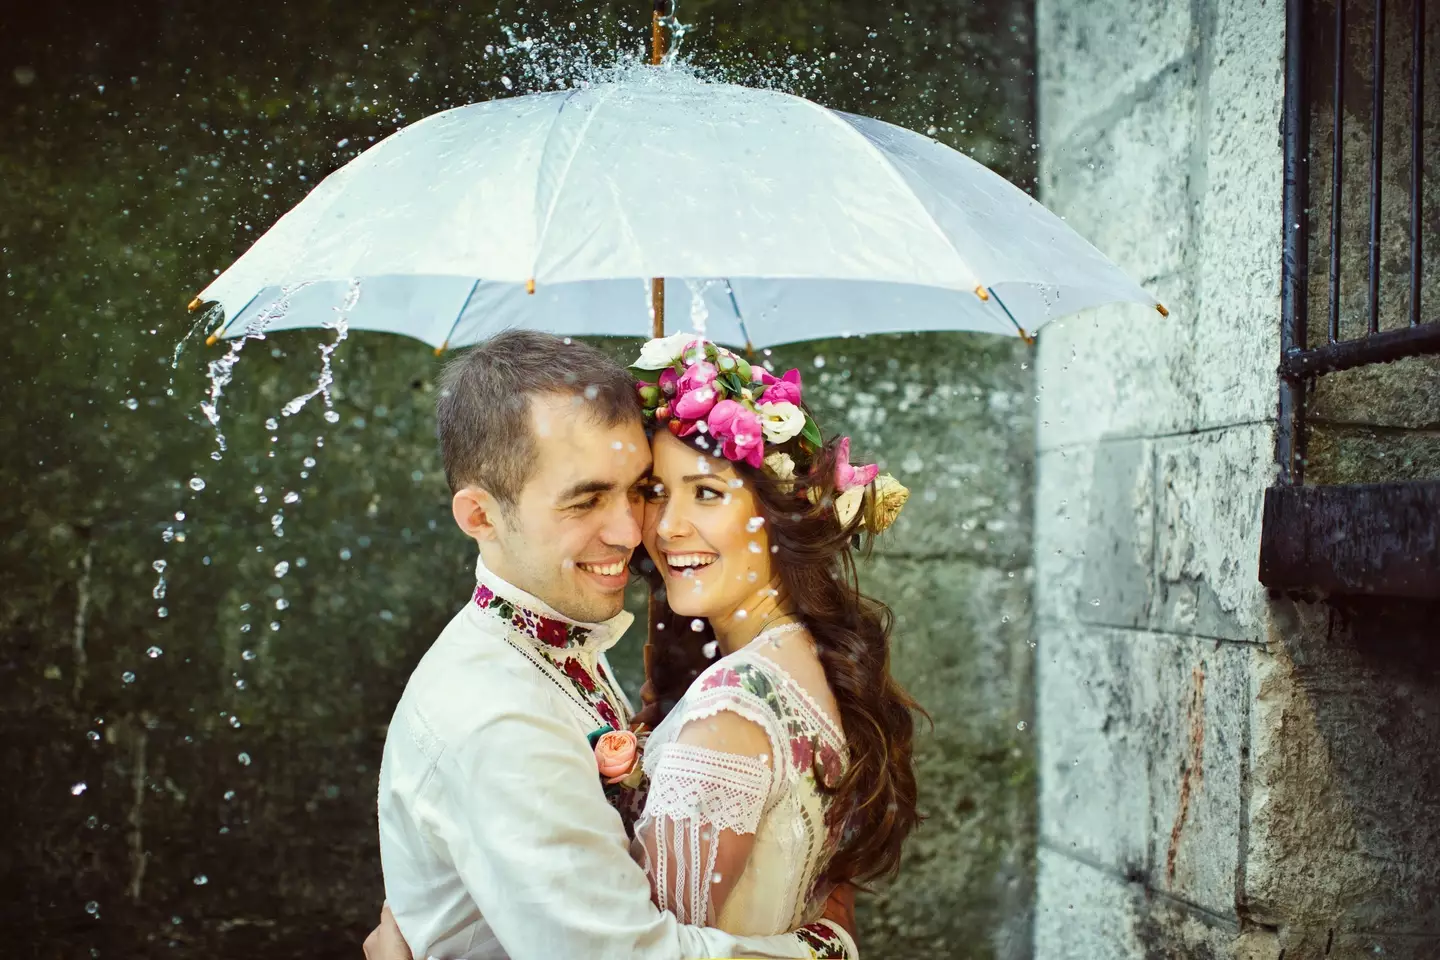 Weddings don't have to be a washout (